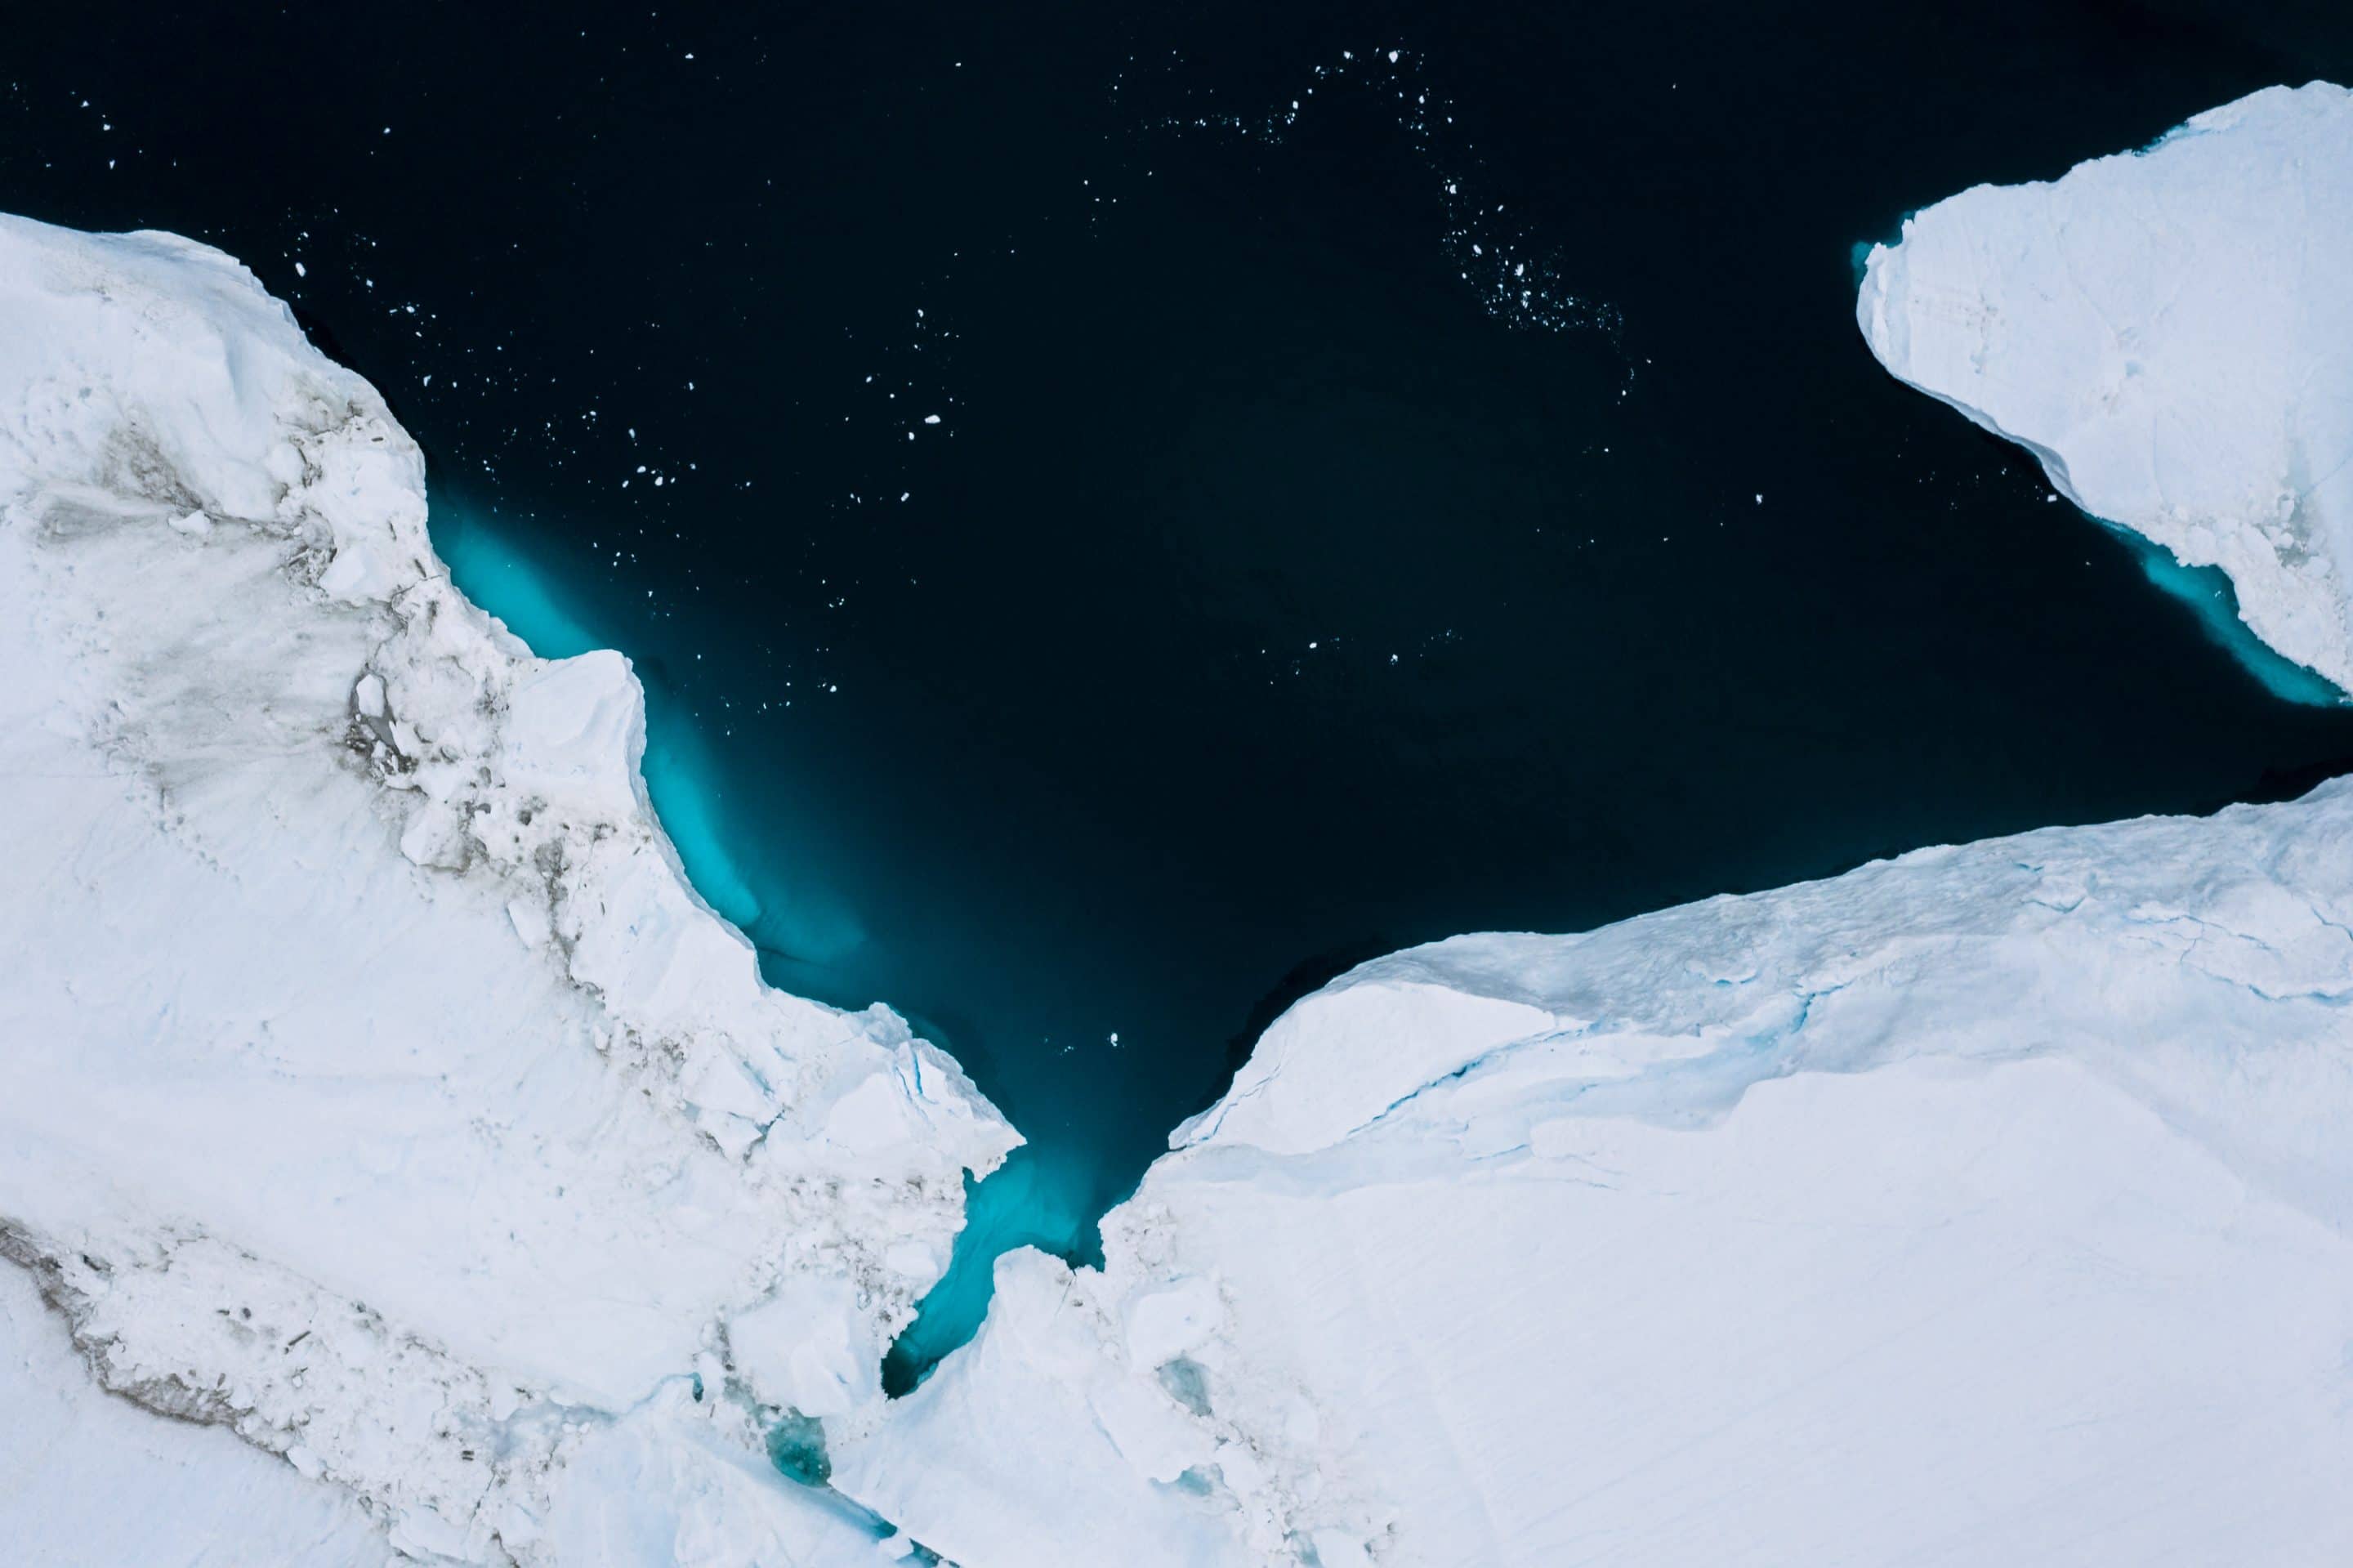 Fine Art photographer Michael Schauer captures the endlessly complex landscape of abstract shapes and forms of icebergs in the Atlantic ocean at the west Greenland coast from above with a drone